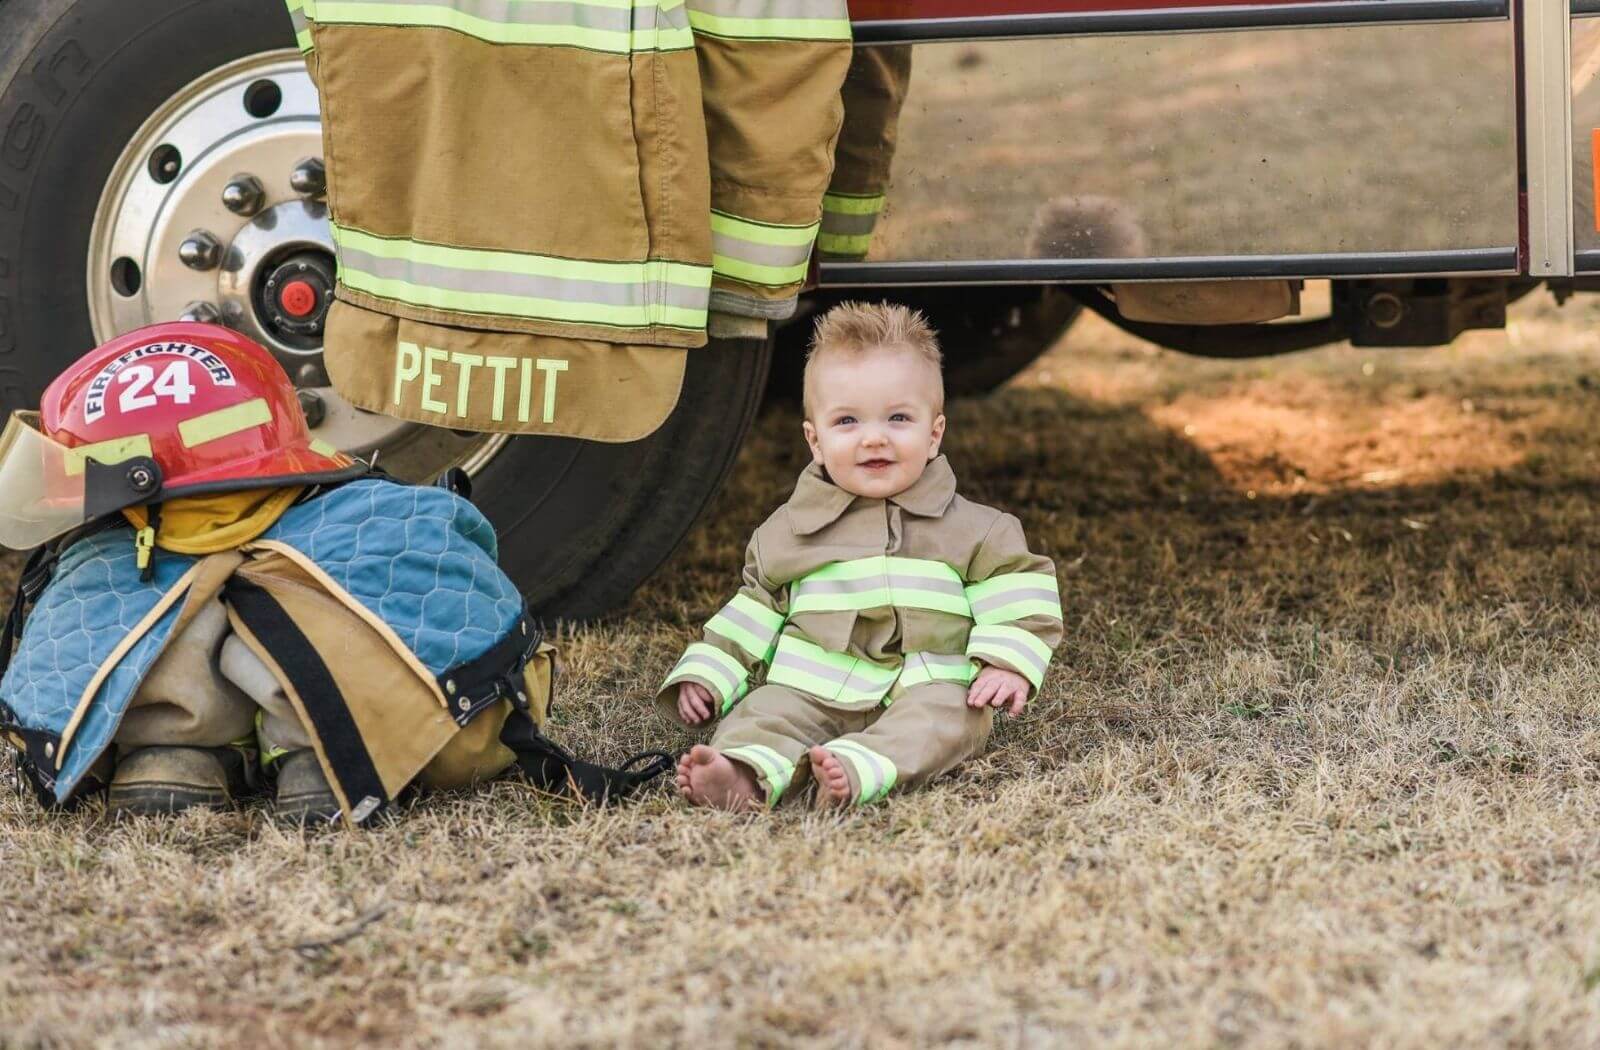 Baby Wearing a turnout gear specially sized for him